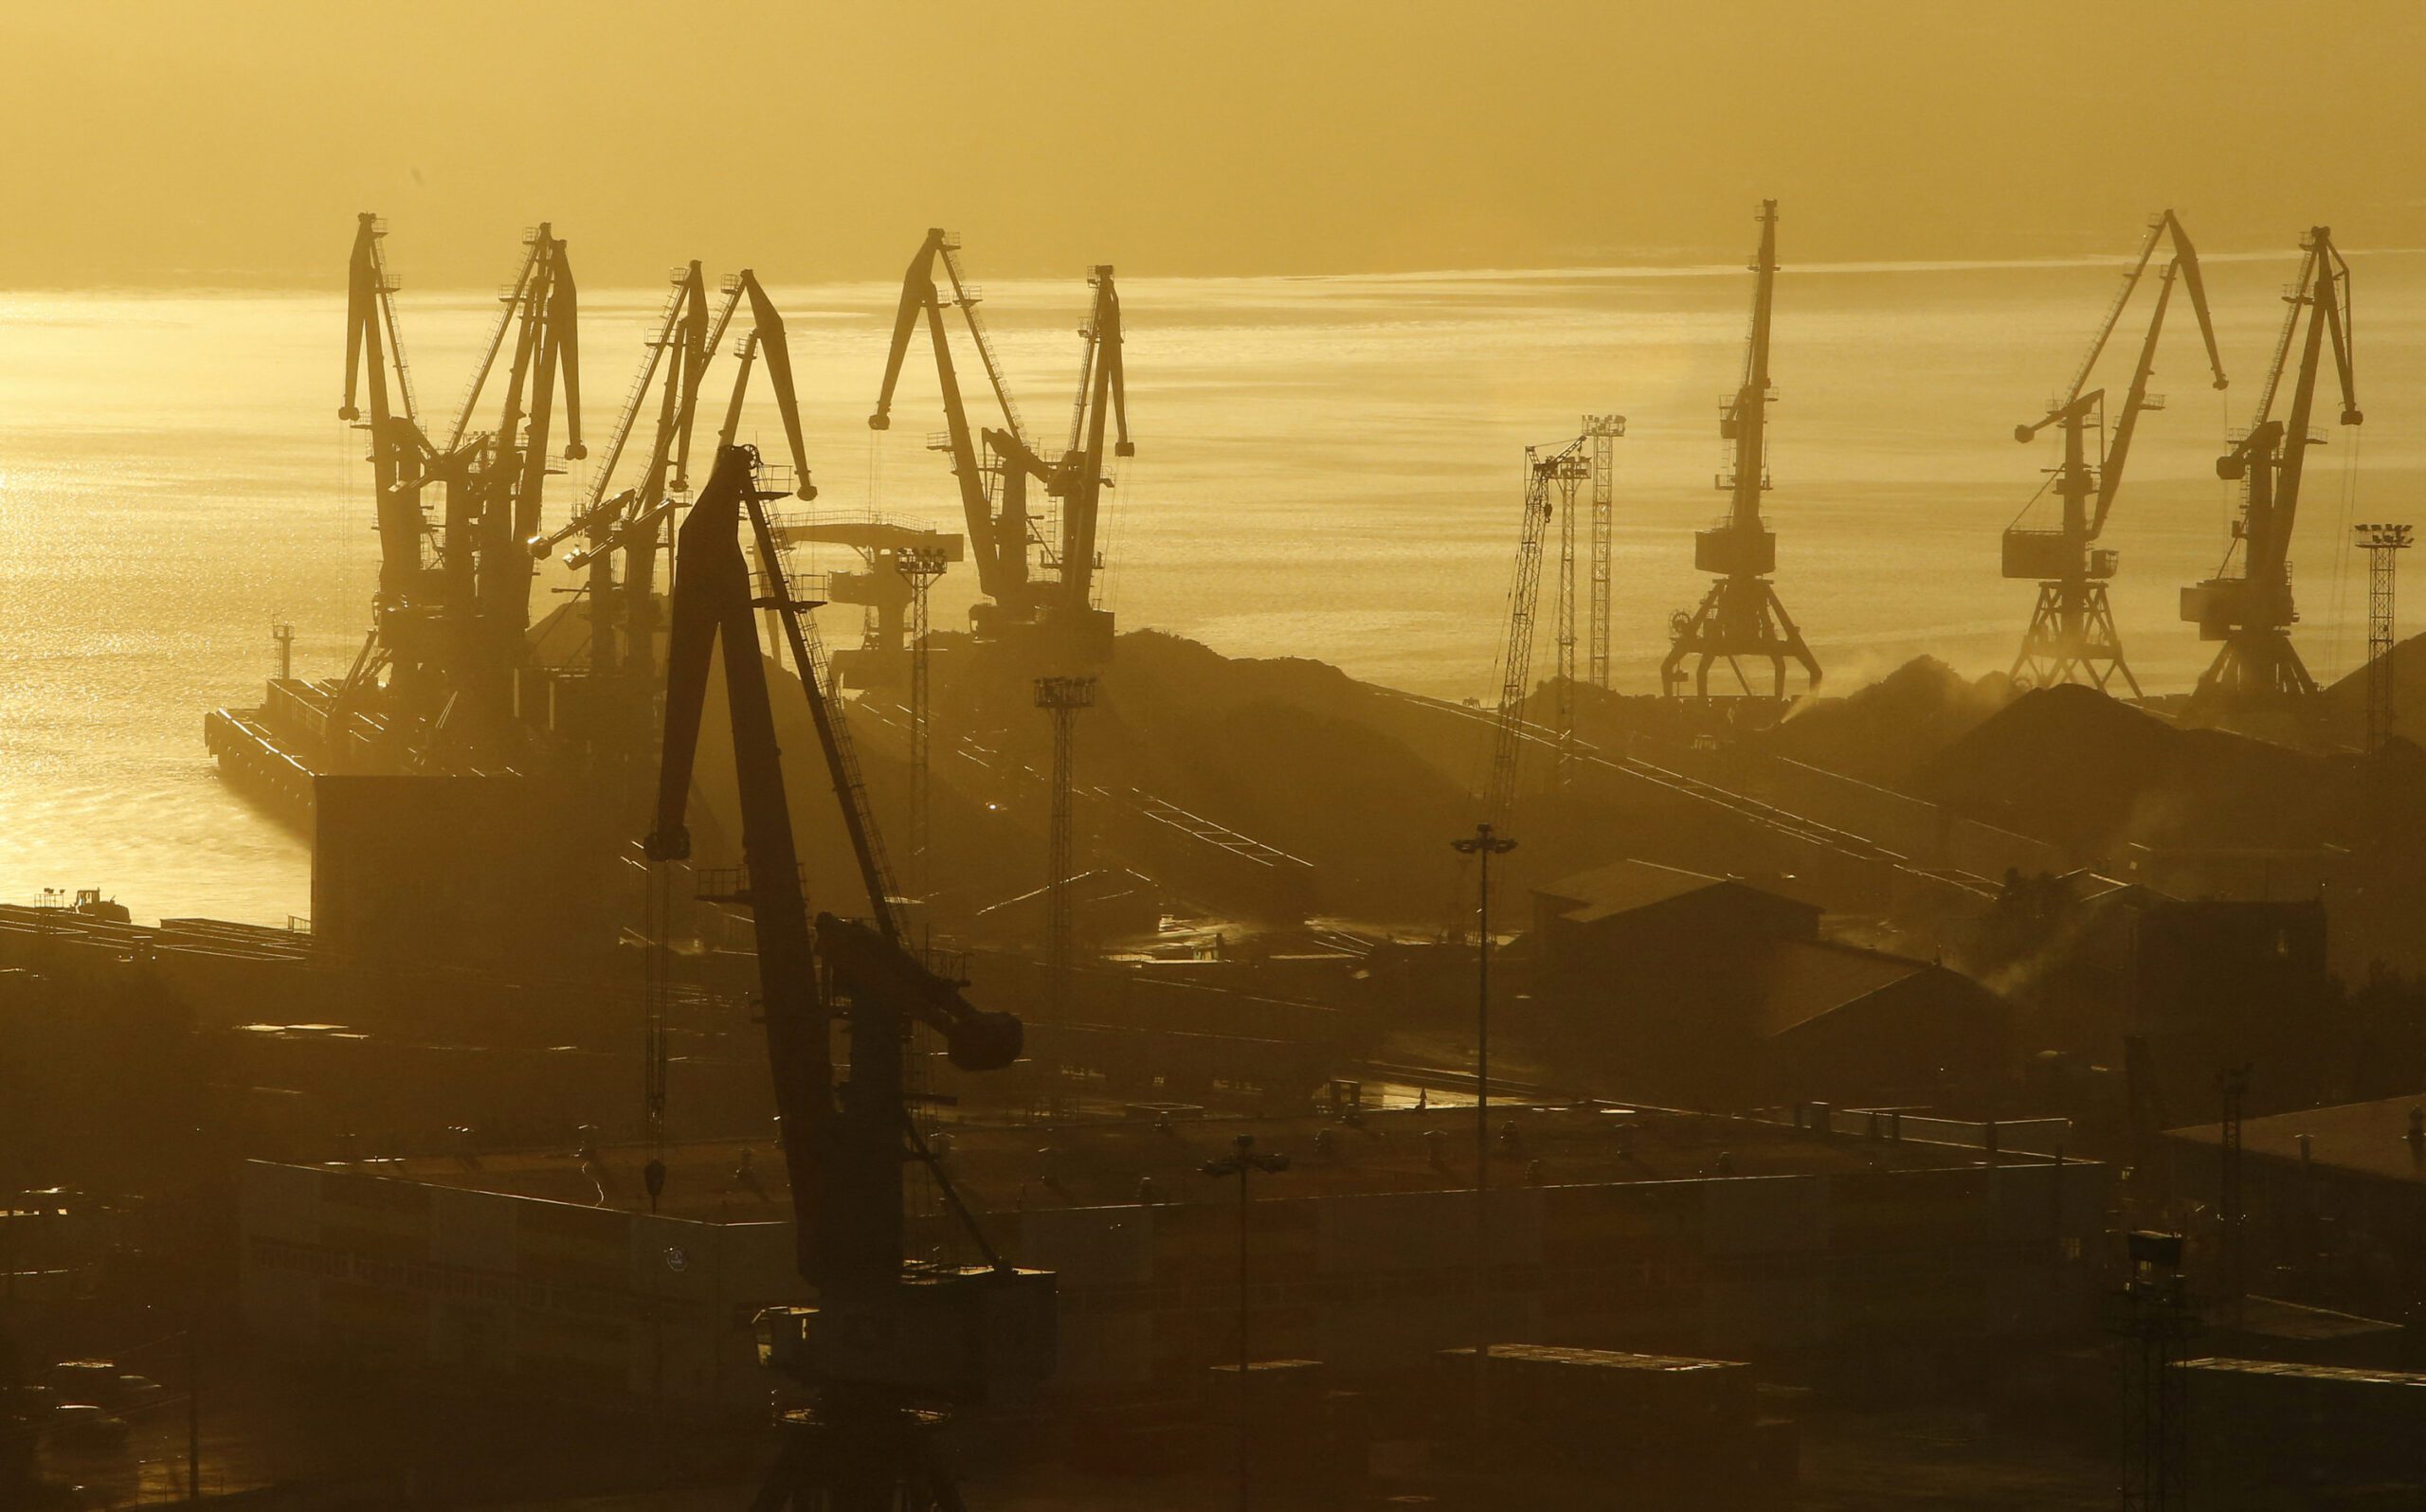 The port of murmansk russia at sunset